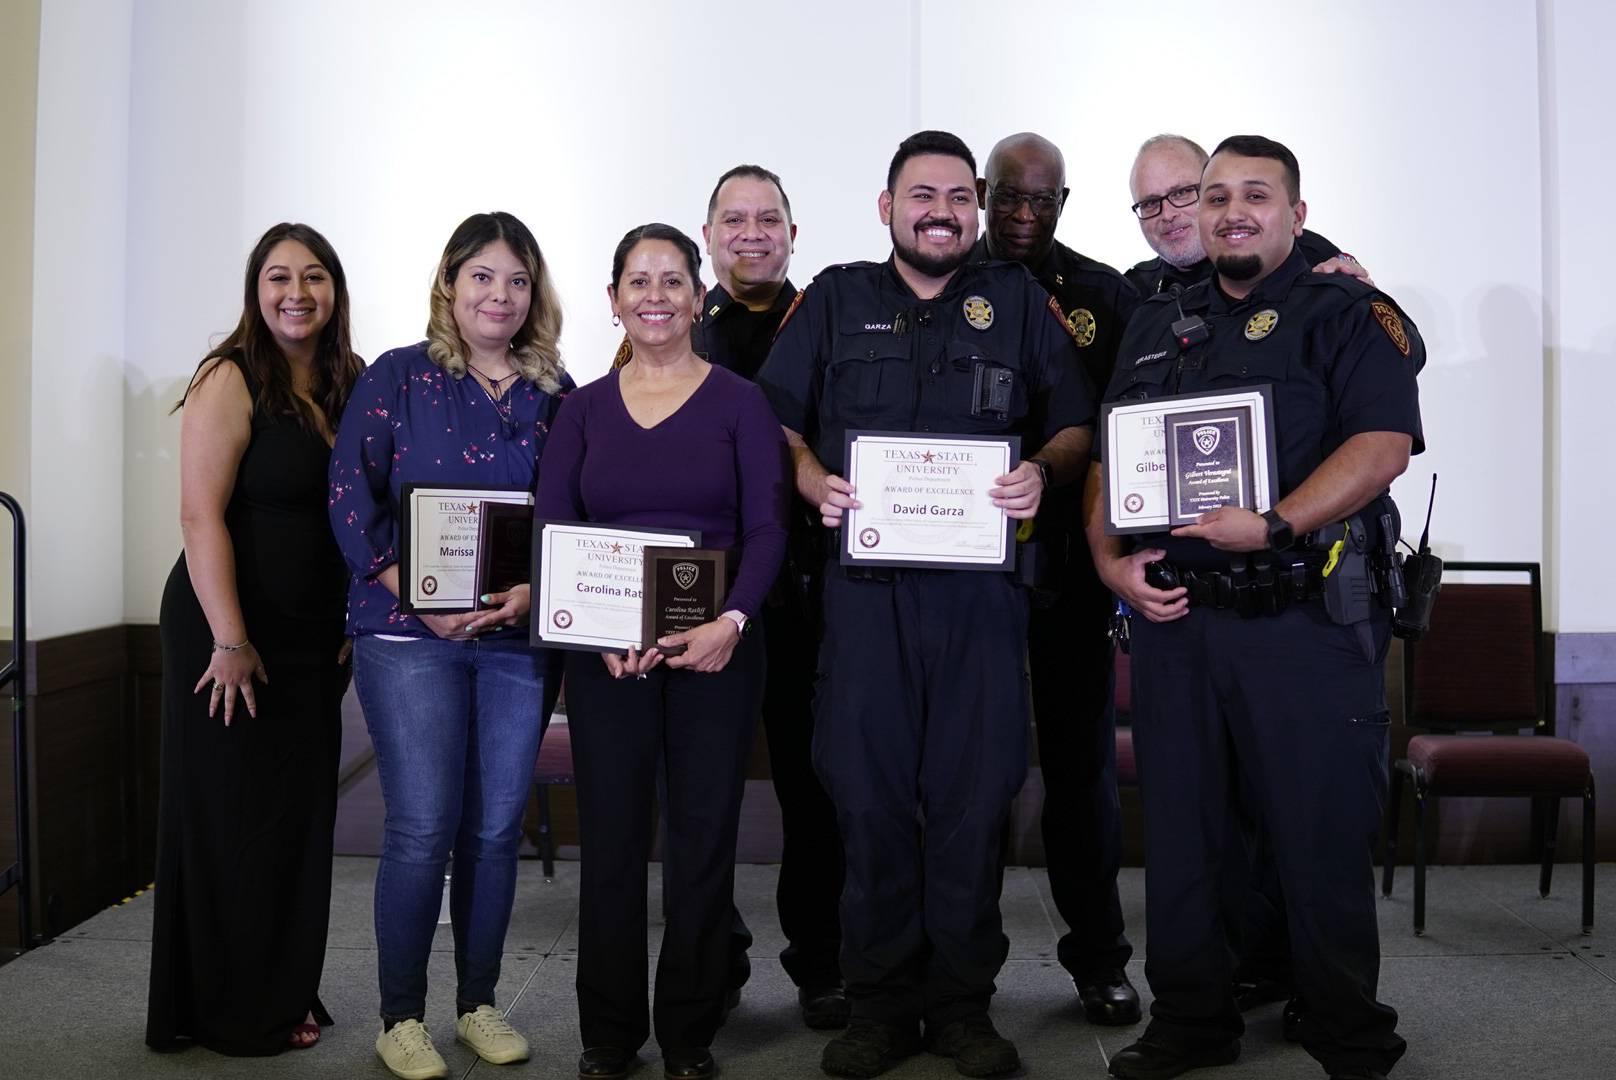 group of police officers with awards